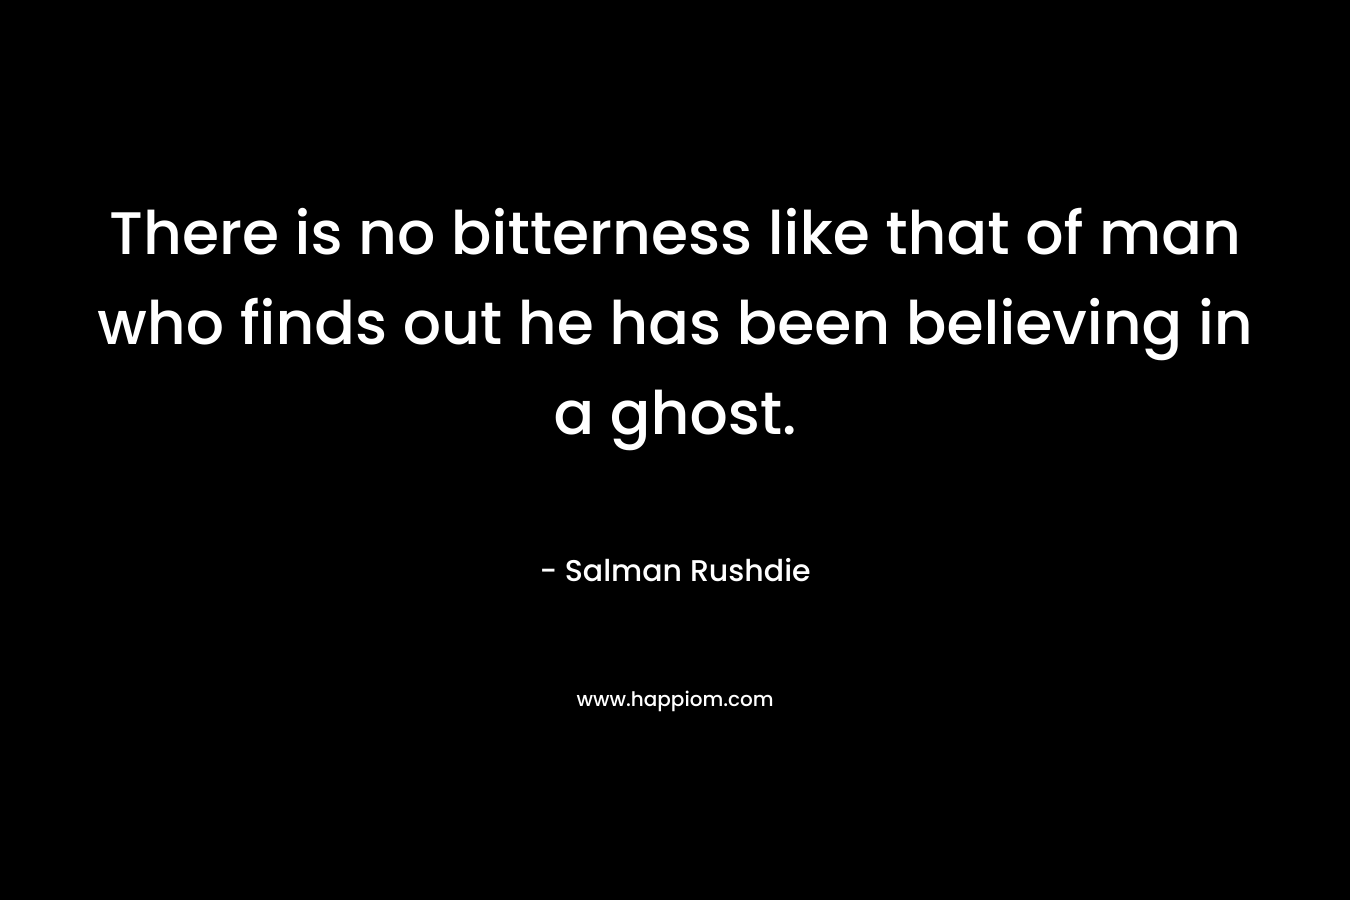 There is no bitterness like that of man who finds out he has been believing in a ghost.